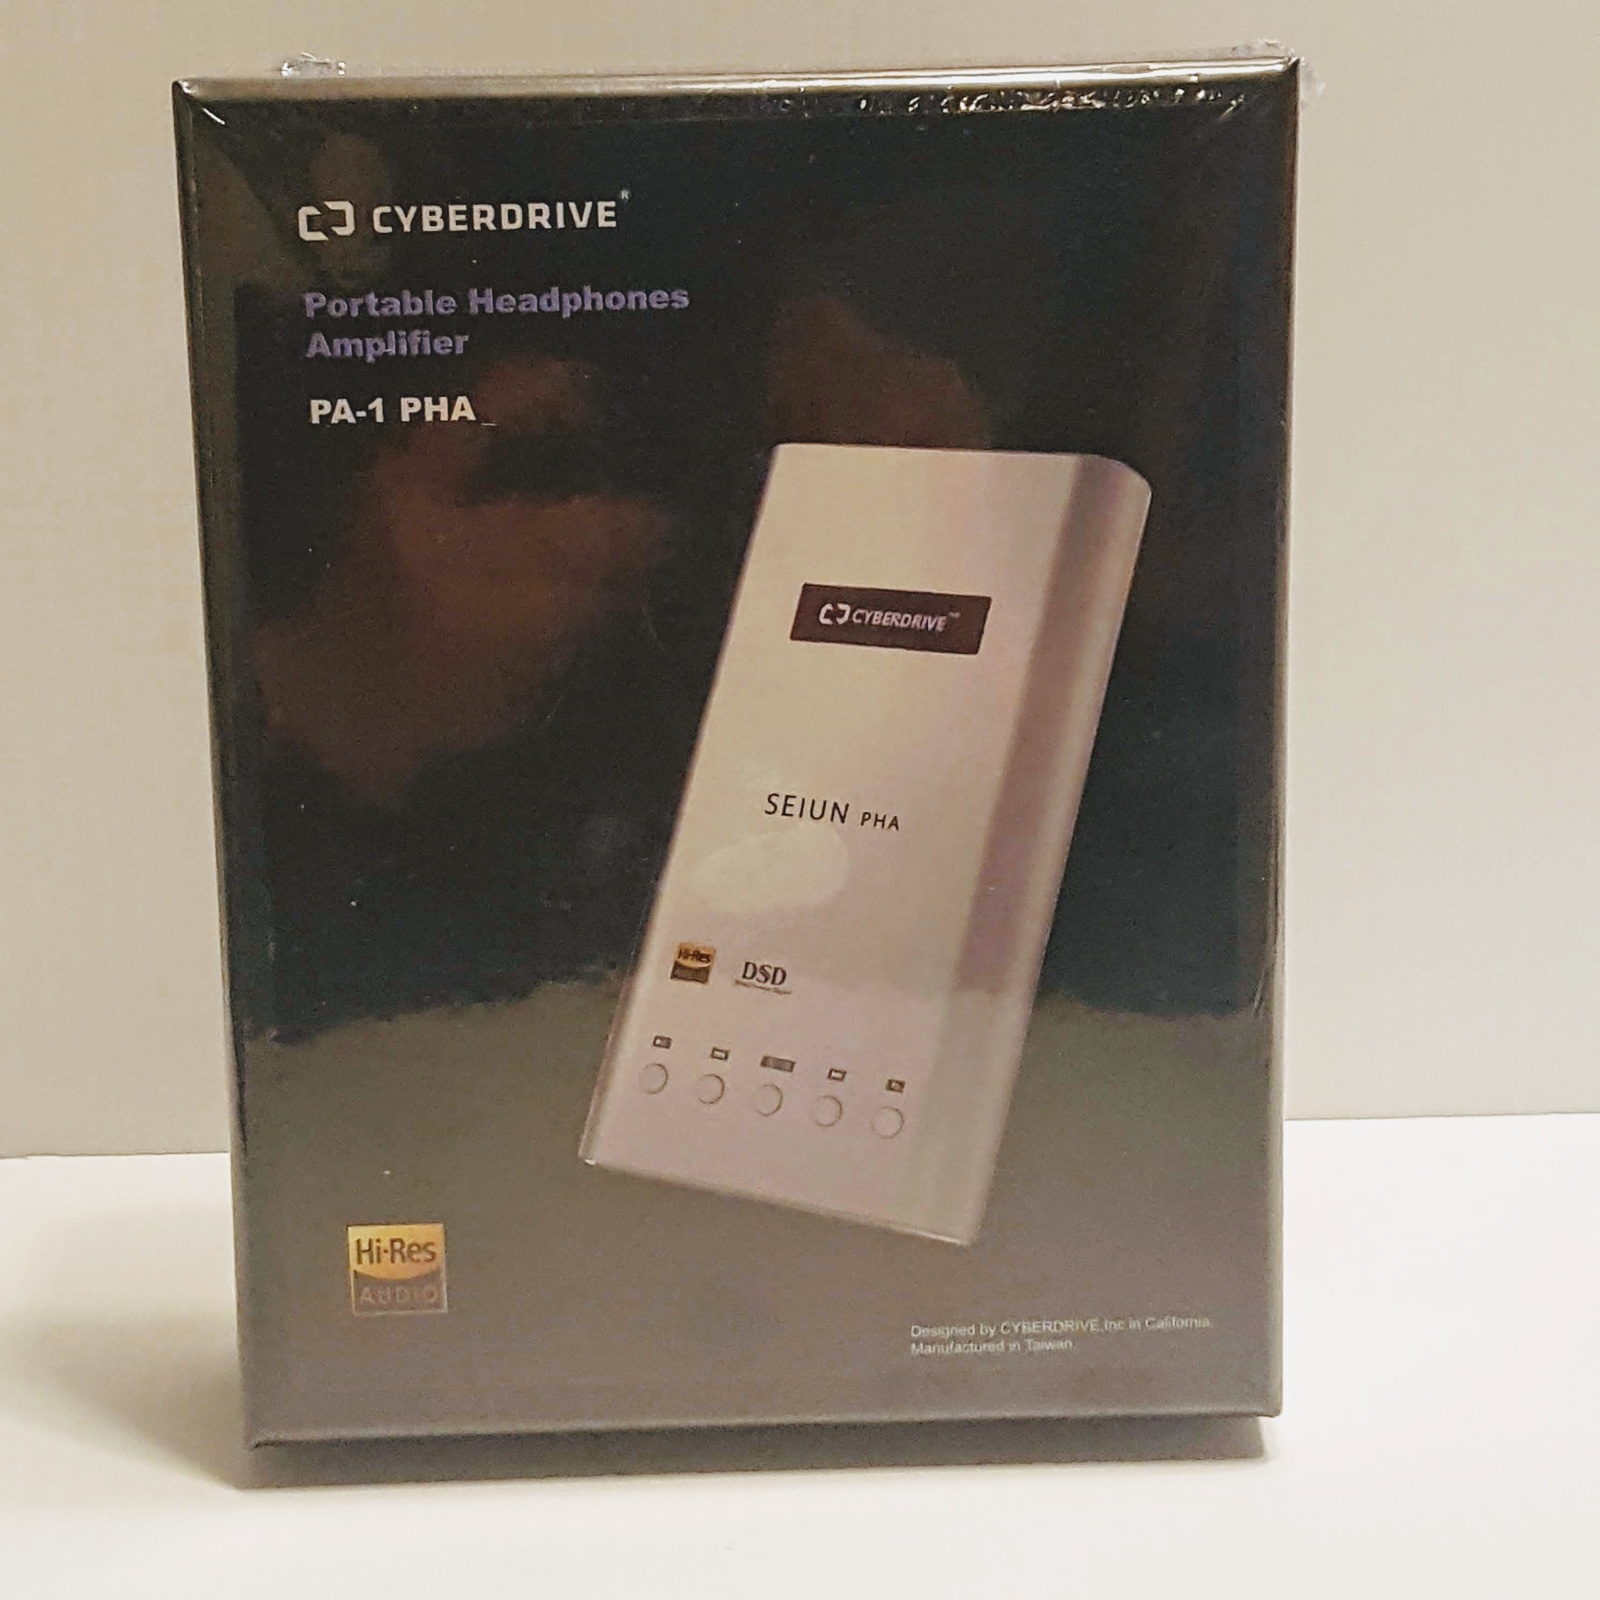 Cyberdrive PHA-1 Portable Headphone Amplifier and Power Bank  New, sealed - $175.00